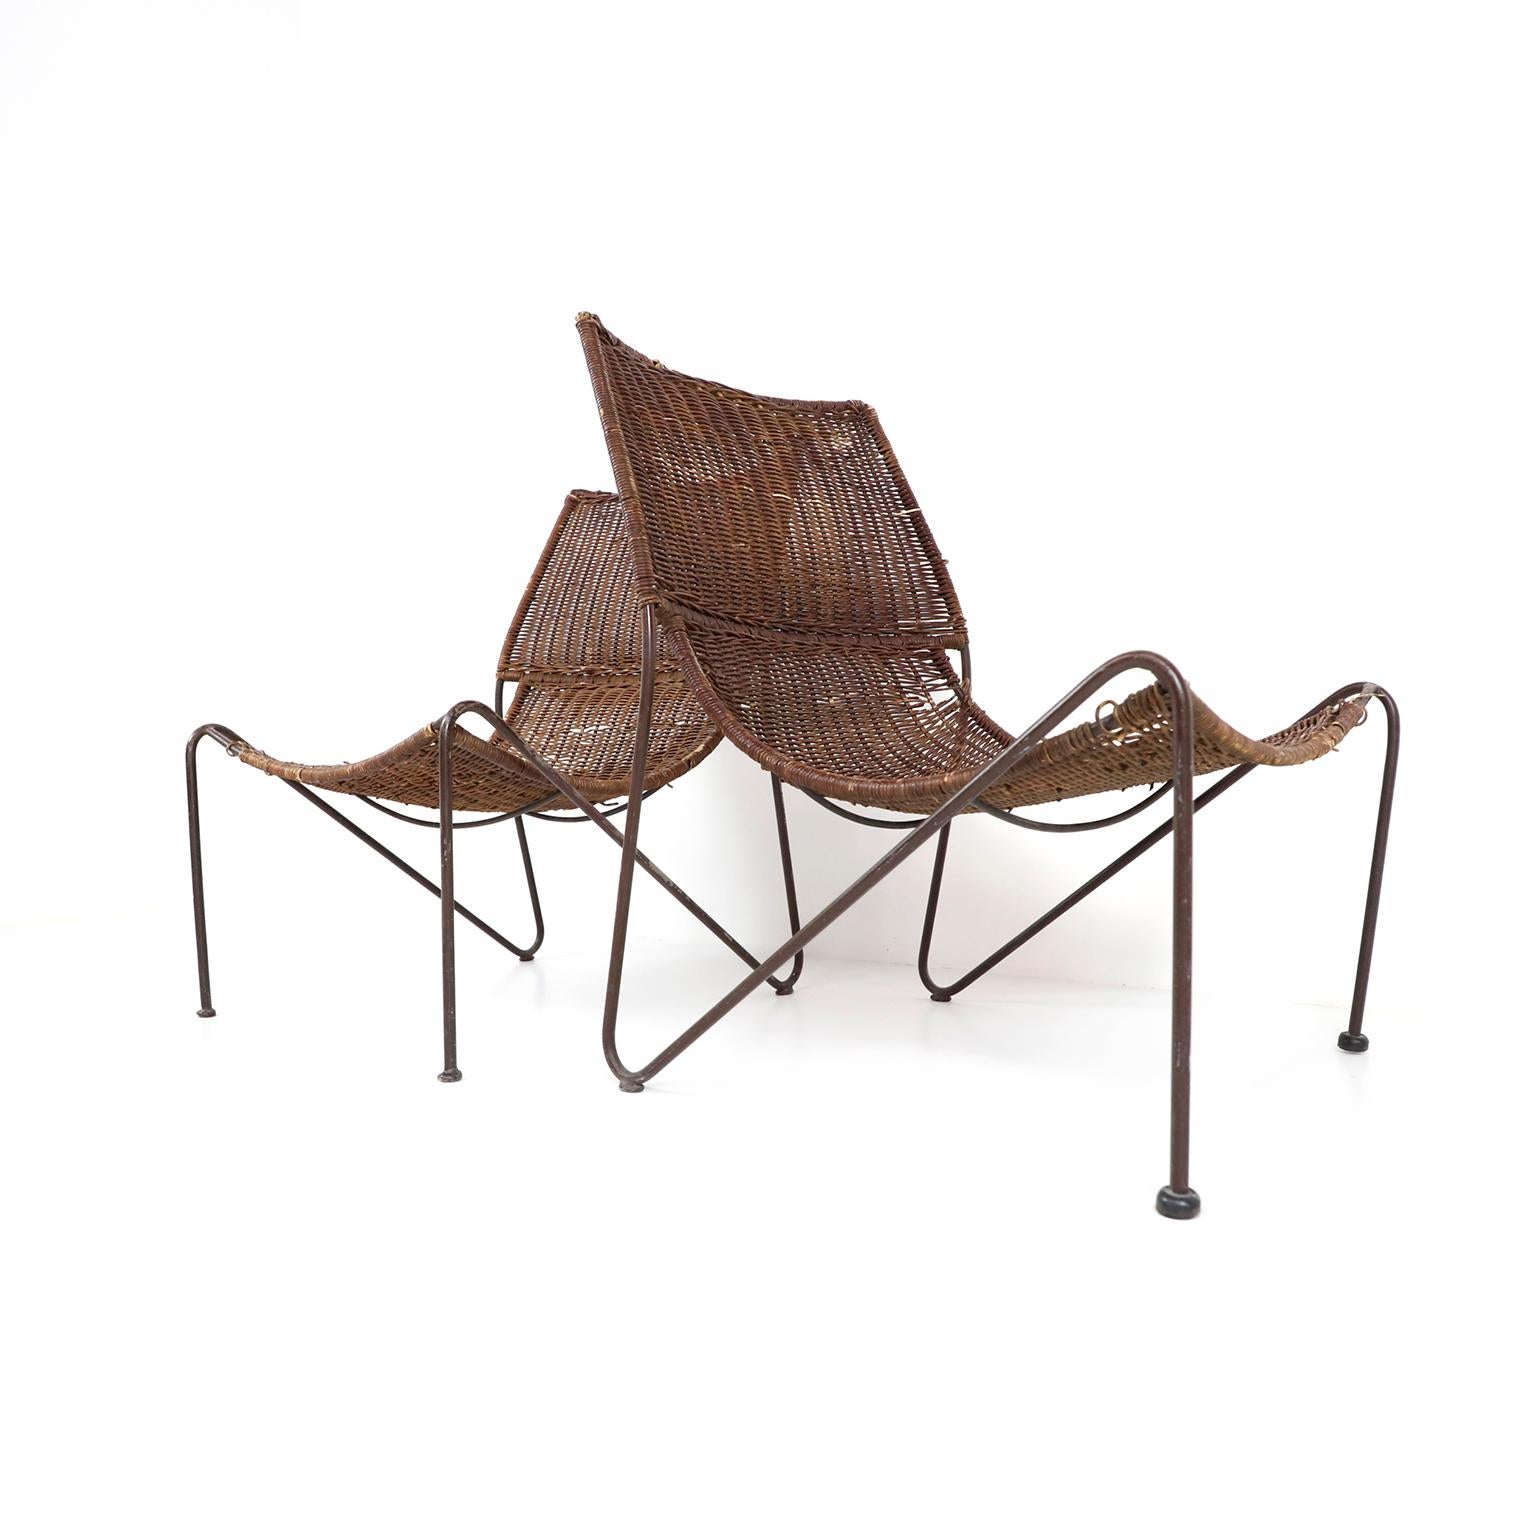 Mid-century style wicker & wrought iron lounge chairs in the manner of Frederick Weinberg.